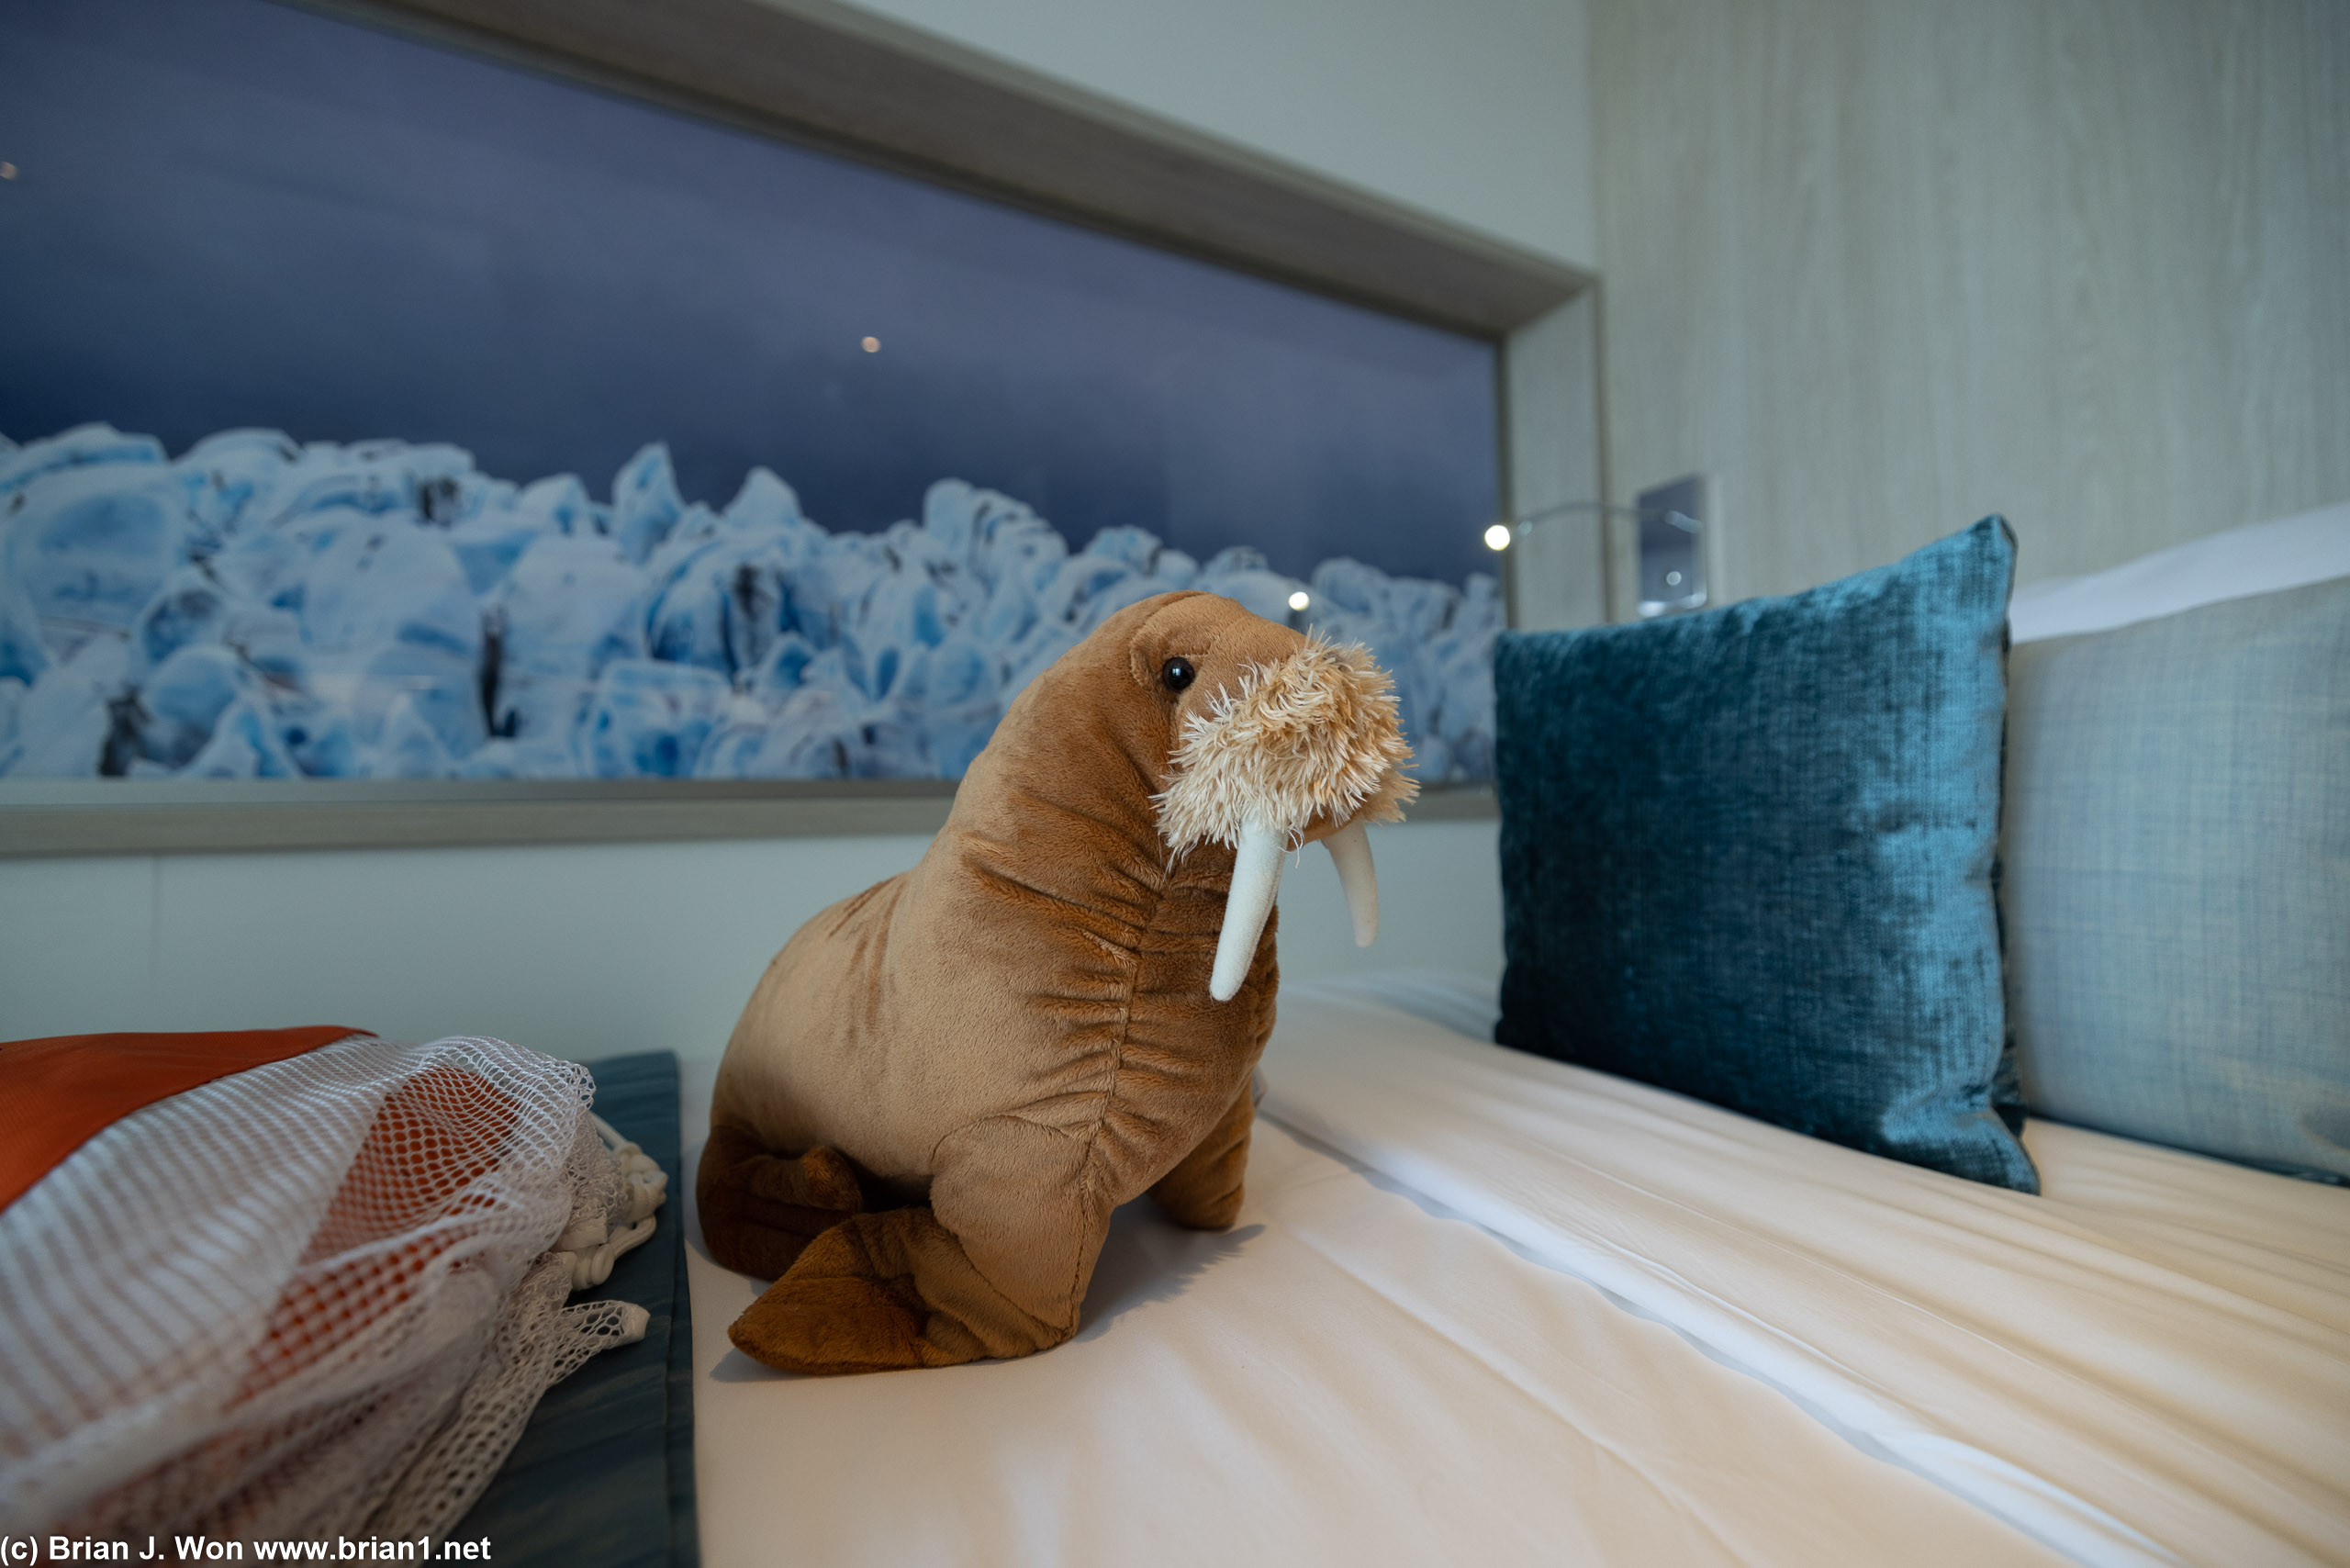 Not sure why all the cabins got a stuffed walrus.